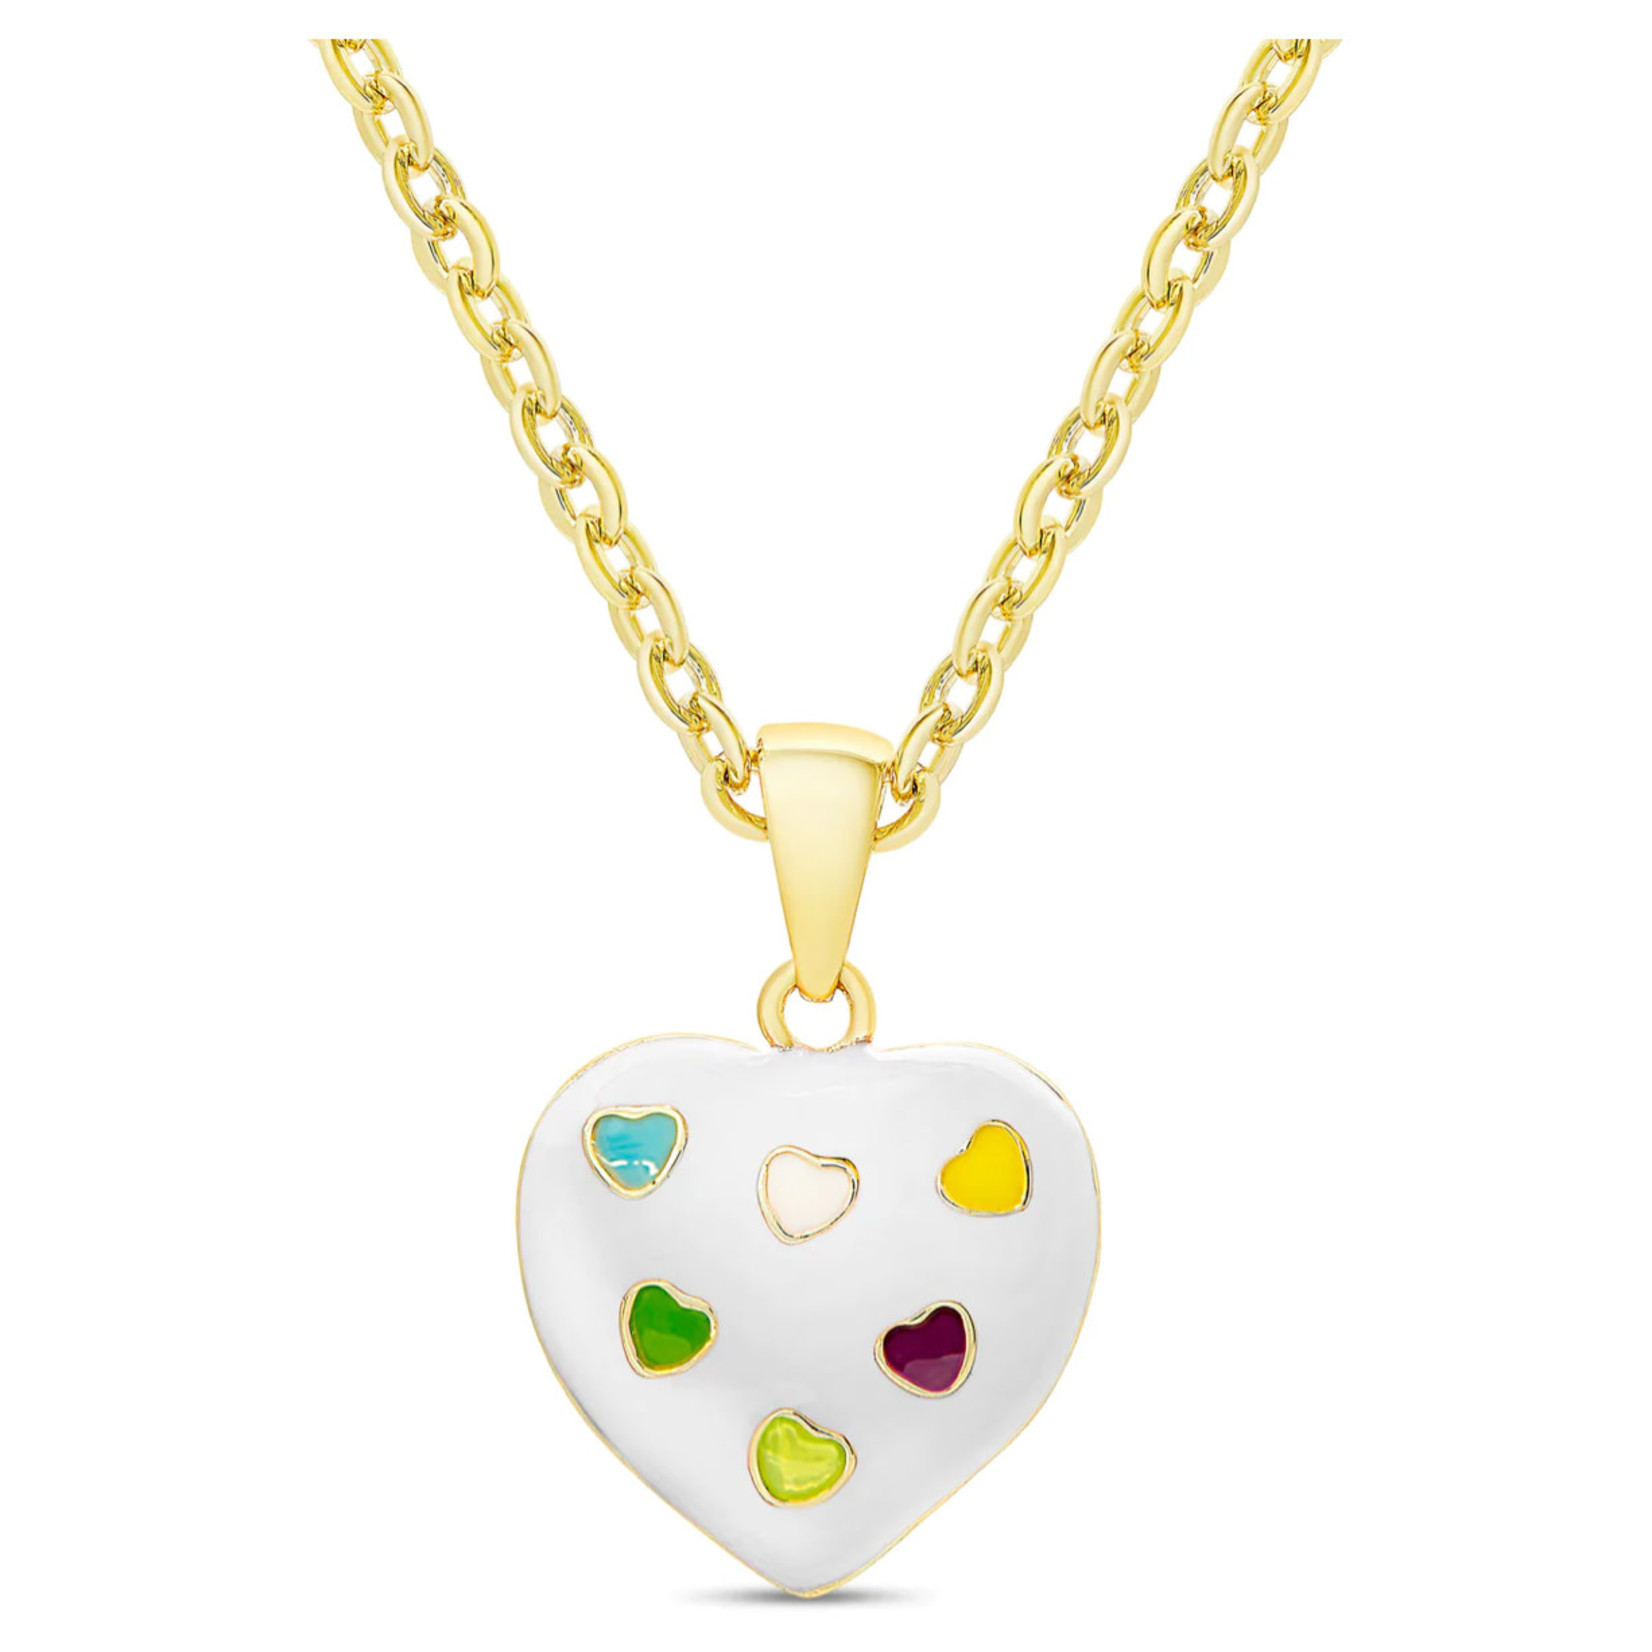 Lily Nily 18k Gold Overlay Puffed Heart Pendant - White